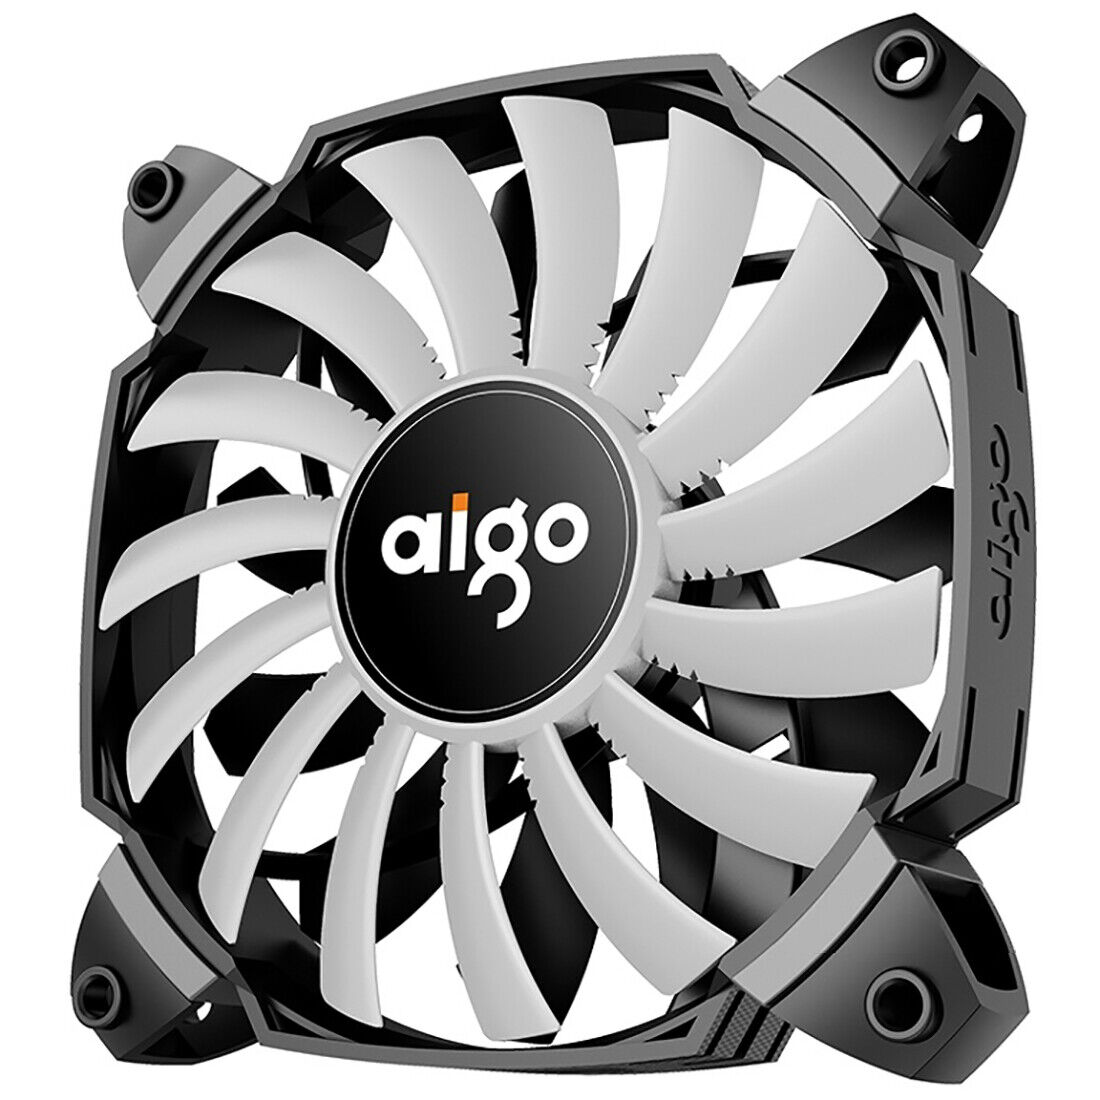 Double Blade Turbo Cooling Fan 120mm Computer Case Fan PC Chassis Radiating Aigo